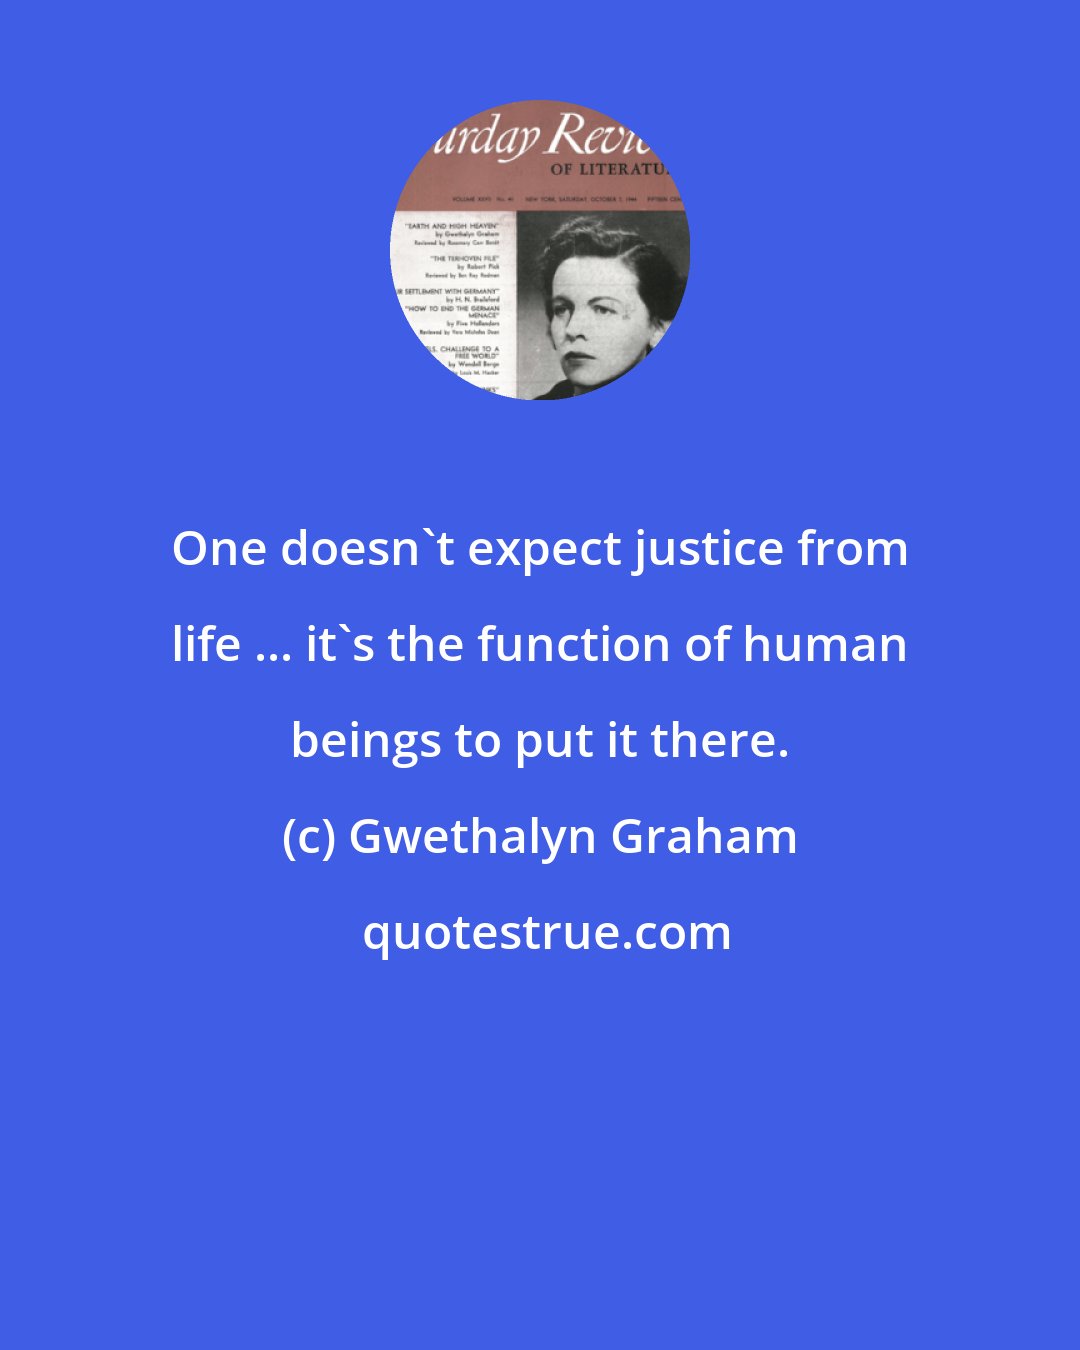 Gwethalyn Graham: One doesn't expect justice from life ... it's the function of human beings to put it there.